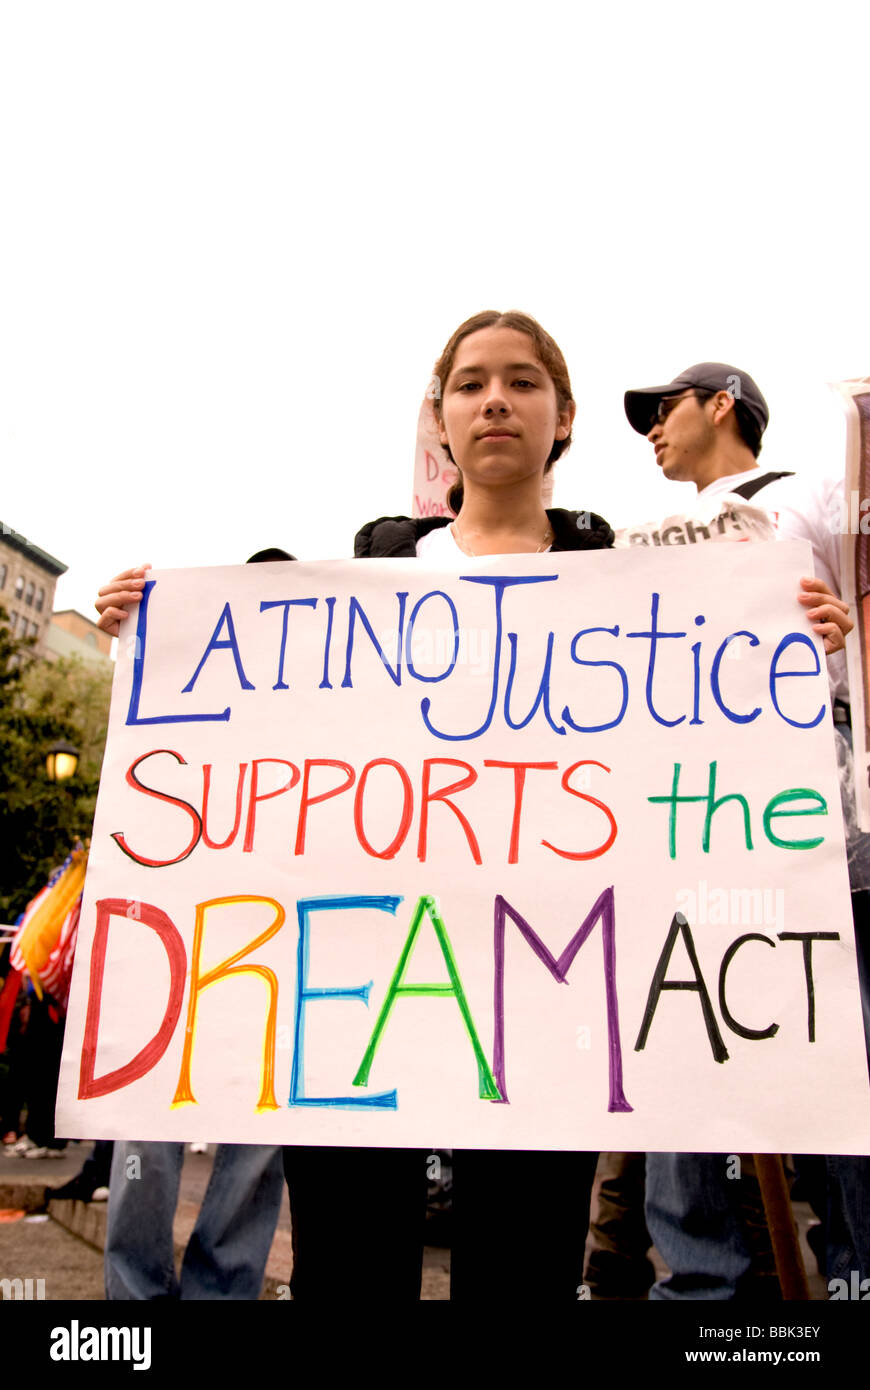 The DREAM ACT - Development, Relief and Education for Alien Minors Act - a bill to a help undocumented immigrant students. Stock Photo